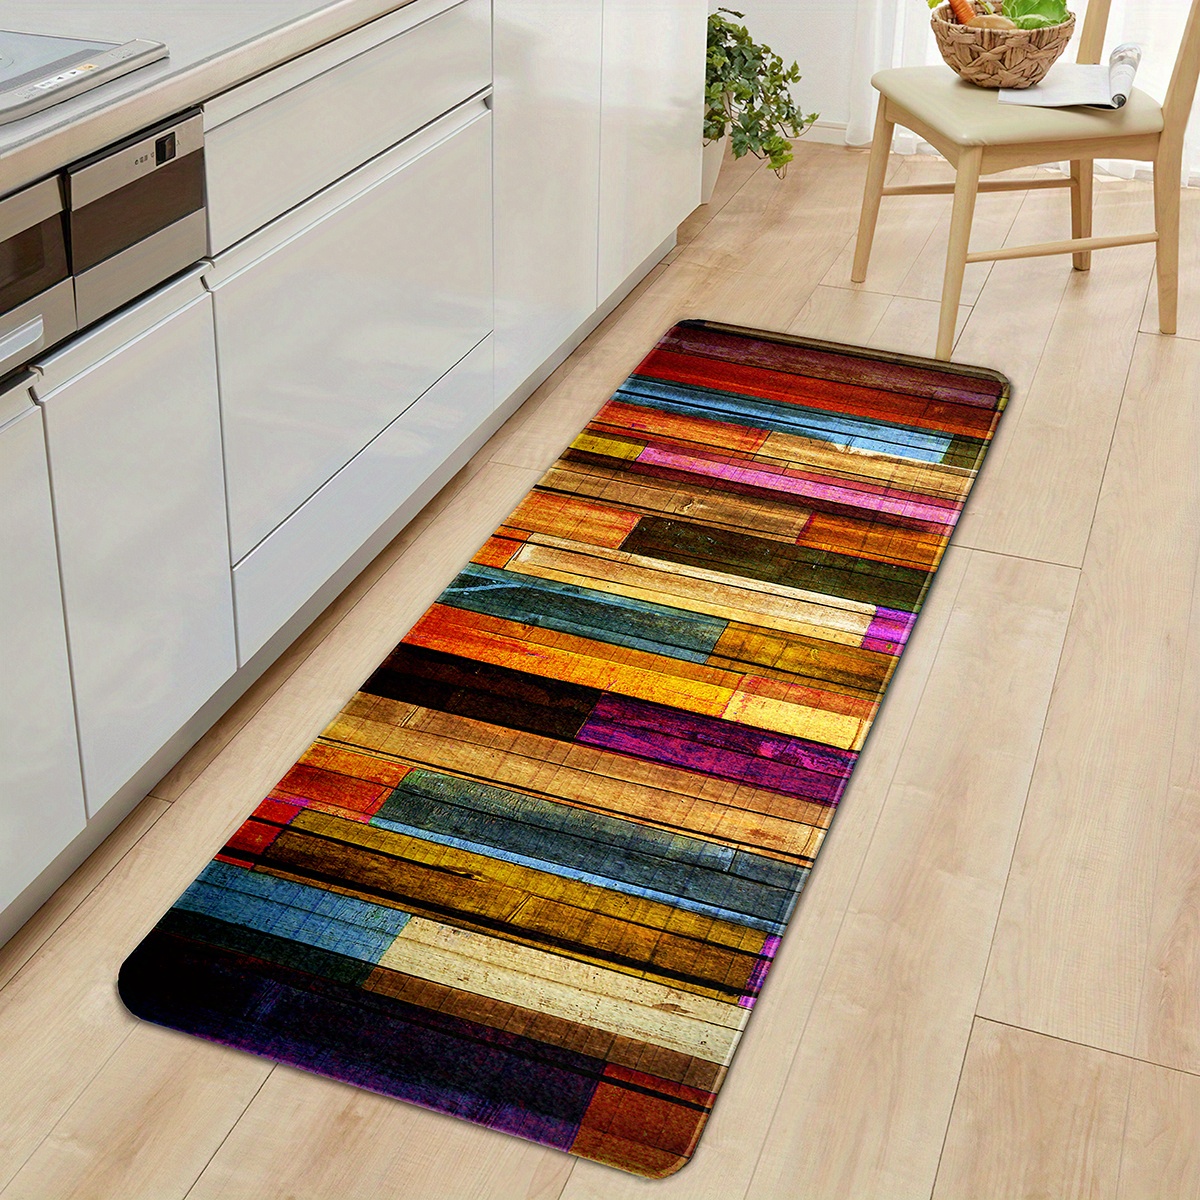 1pc Anti Fatigue Kitchen Rugs, Vintage Colorful Wooden Striped Absorbent  Non Slip Cushioned Rugs, Stain Resistant Long Strip Floor Mat, Comfort  Standing Mats, Living Room Bedroom Bathroom Kitchen Sink Laundry Office Area